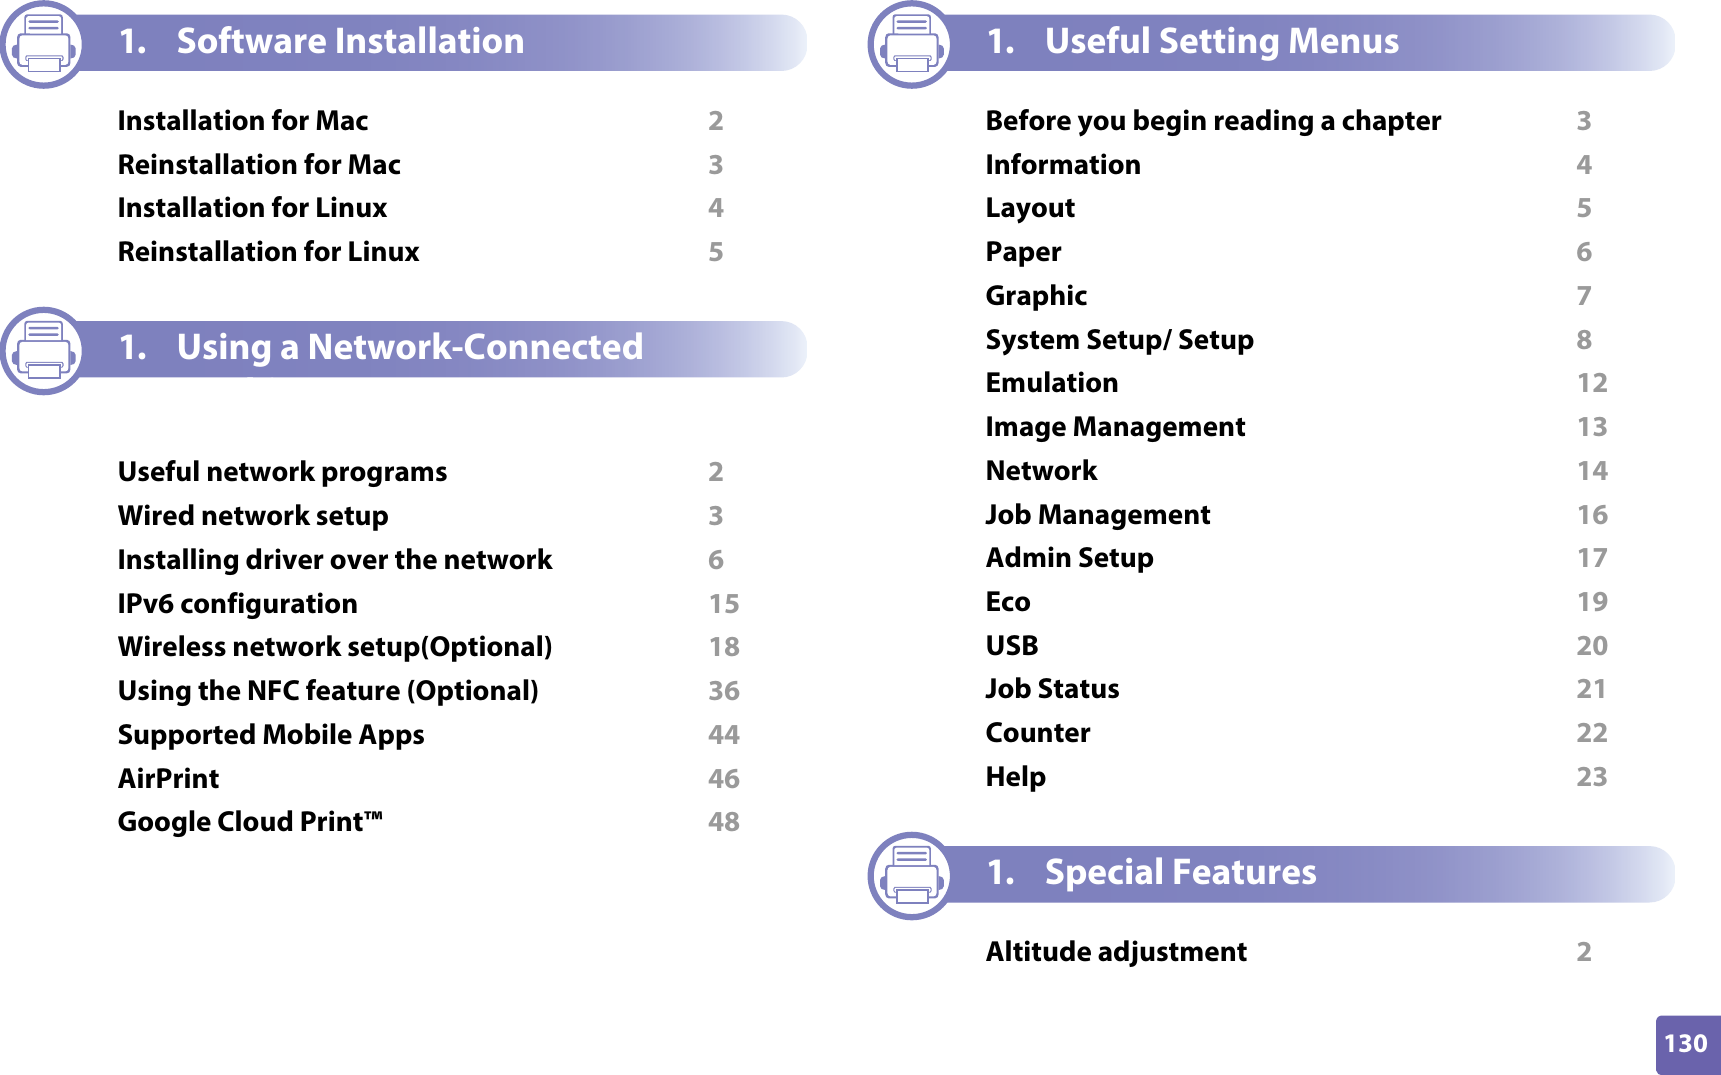 130ADVANCED1. Software InstallationInstallation for Mac  2Reinstallation for Mac  3Installation for Linux  4Reinstallation for Linux  51. Using a Network-Connected MachineUseful network programs  2Wired network setup  3Installing driver over the network  6IPv6 configuration  15Wireless network setup(Optional)  18Using the NFC feature (Optional)  36Supported Mobile Apps  44AirPrint  46Google Cloud Print™  481. Useful Setting MenusBefore you begin reading a chapter  3Information  4Layout  5Paper  6Graphic  7System Setup/ Setup  8Emulation  12Image Management  13Network  14Job Management  16Admin Setup  17Eco  19USB  20Job Status  21Counter  22Help  231. Special FeaturesAltitude adjustment  2